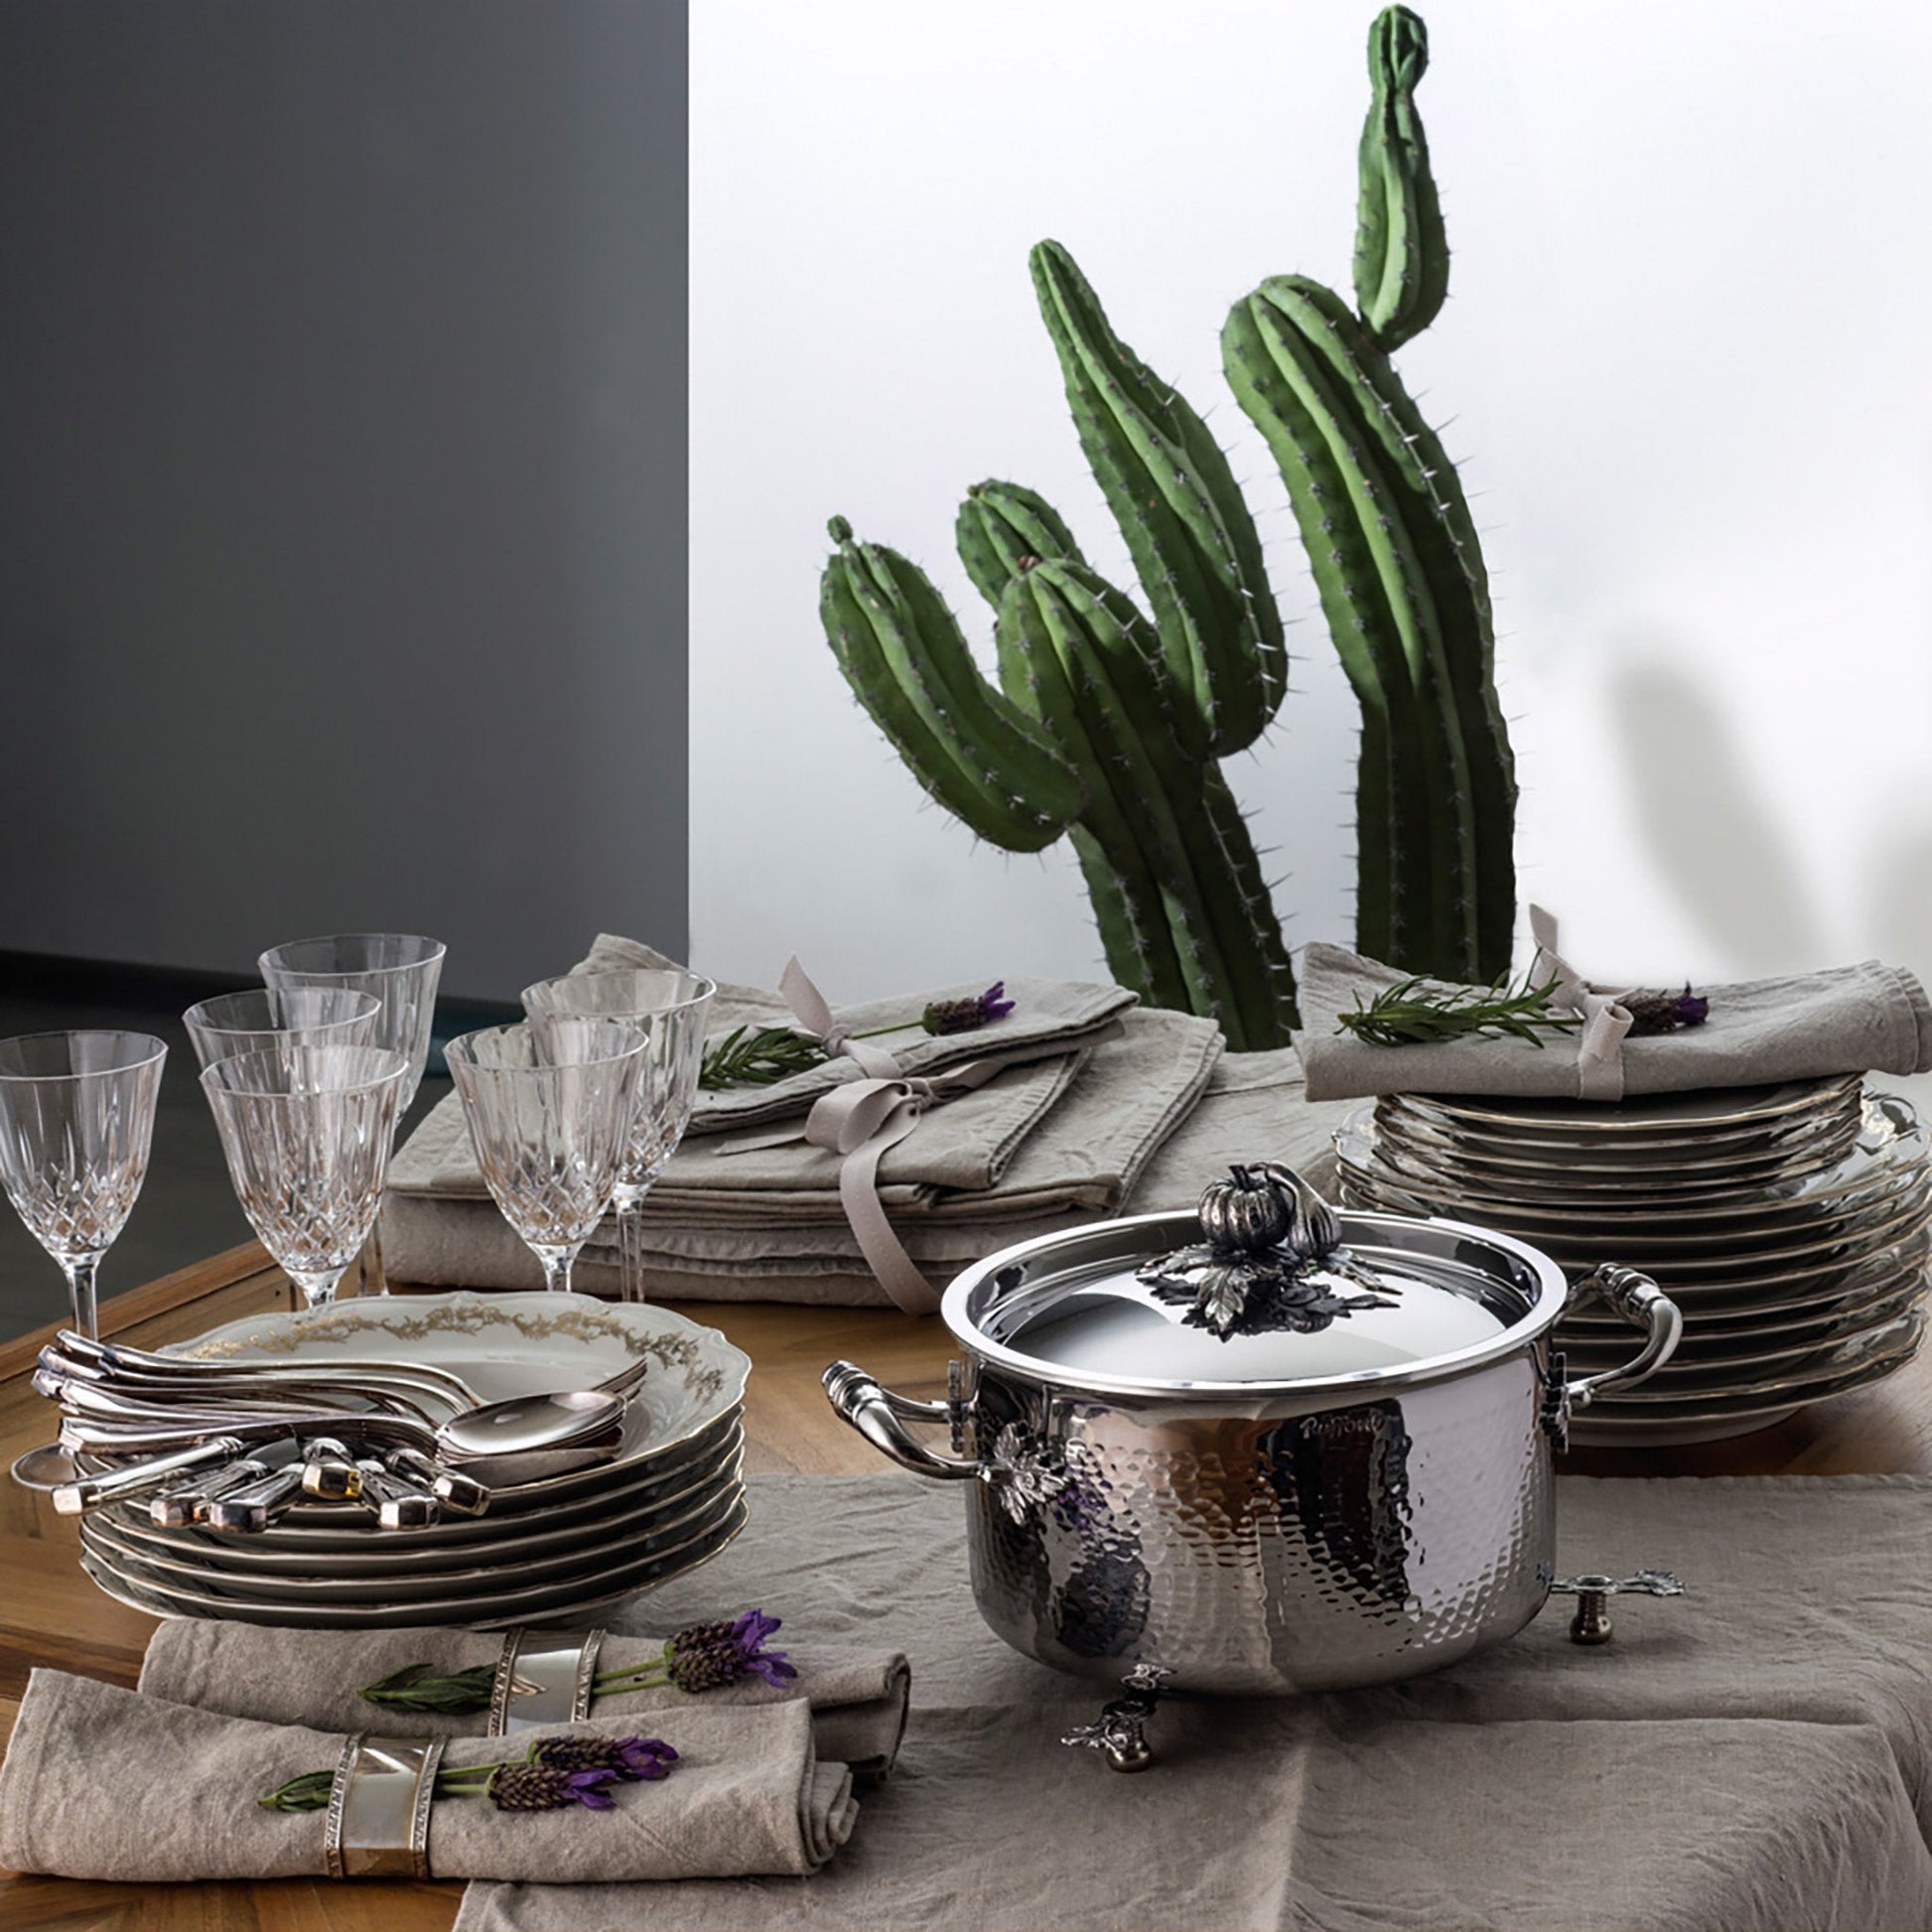 Soup pot on a table with plates, glasses, silverware, and a couple cacti.